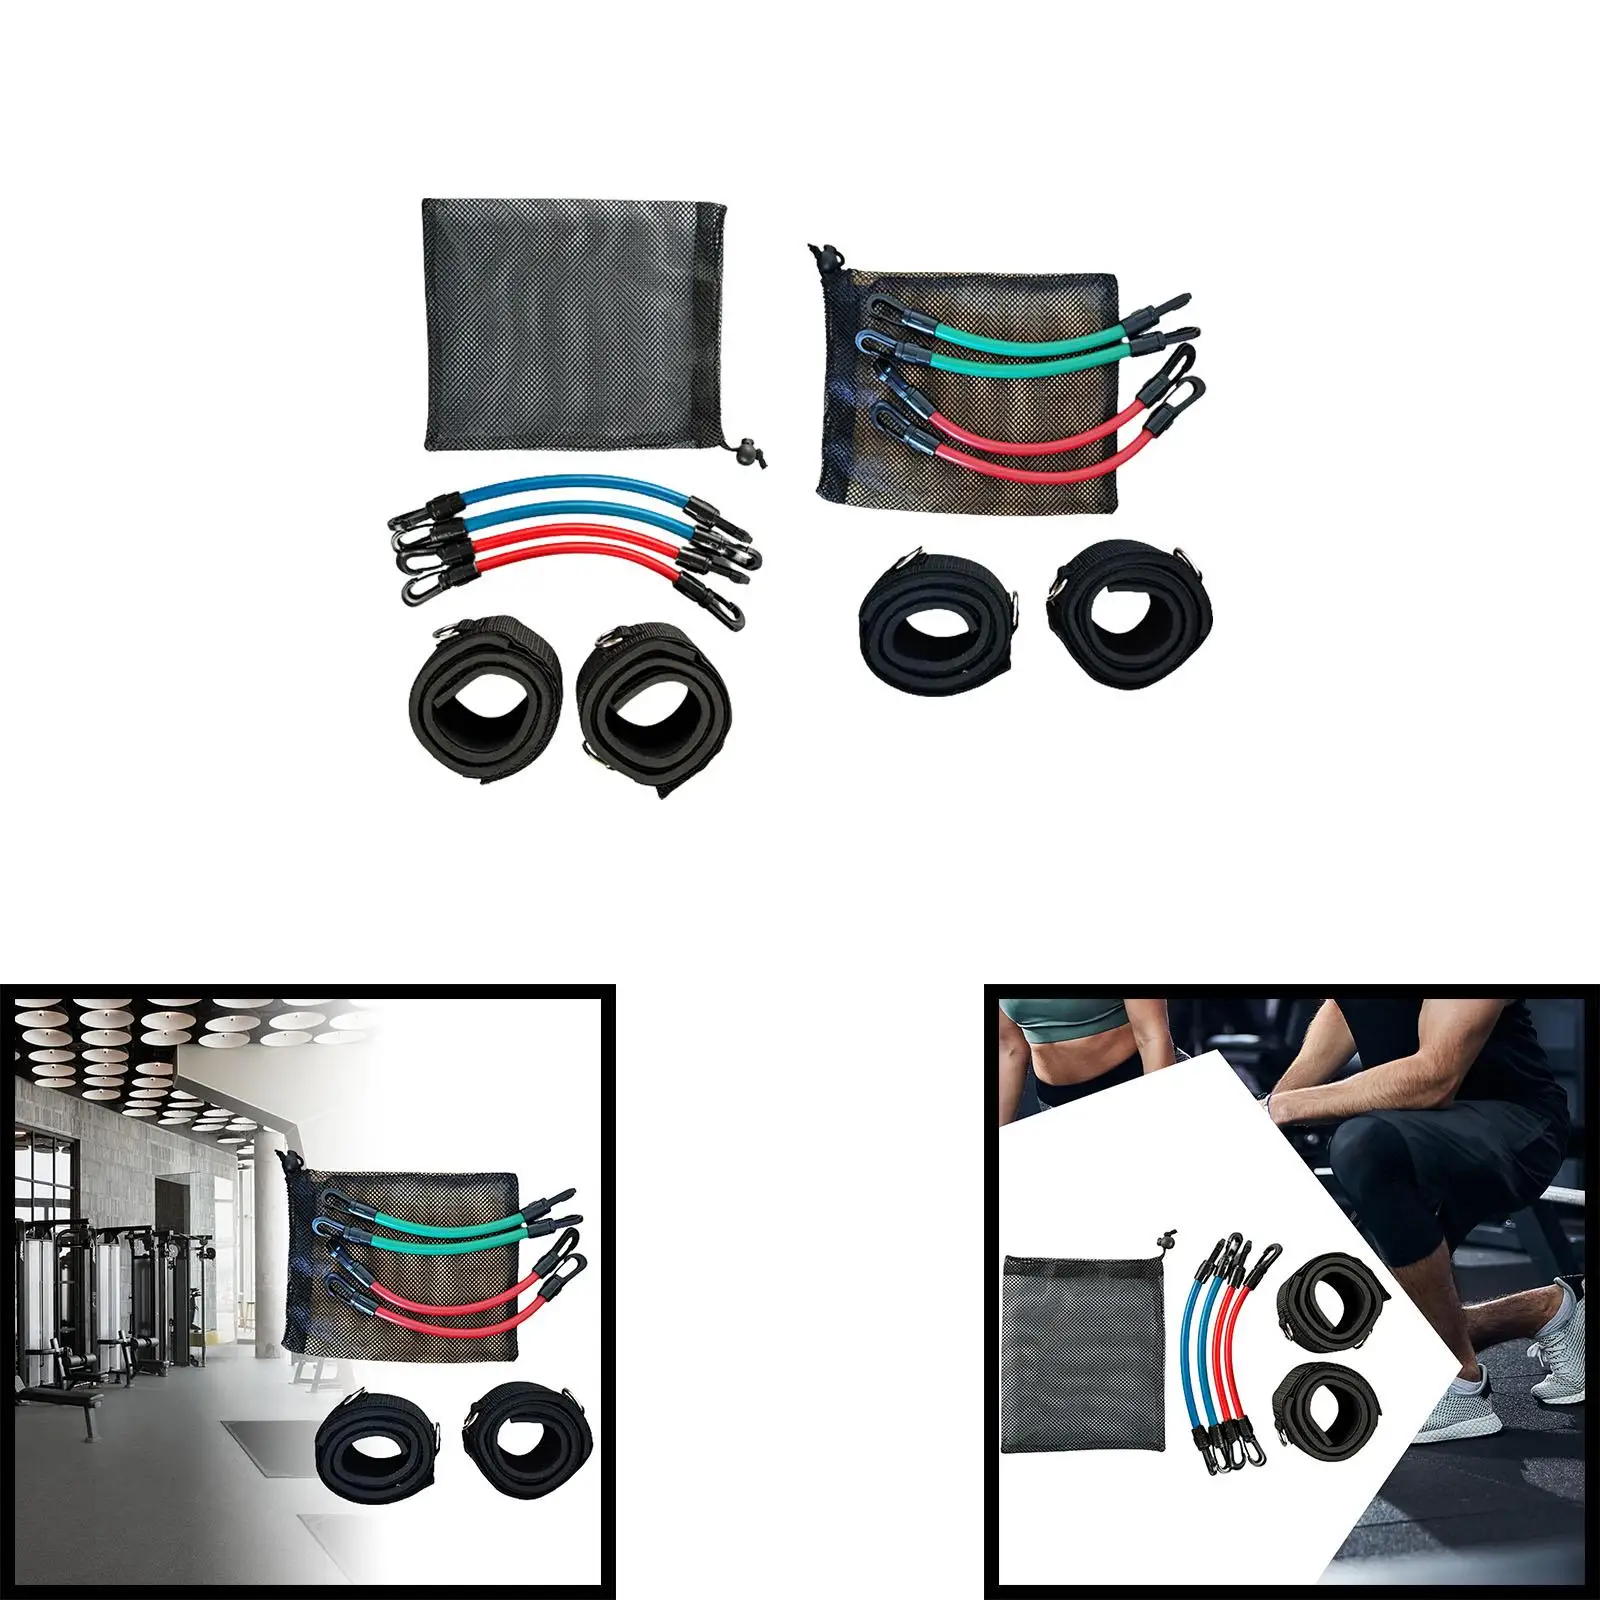 Ankle Resistance Bands Kit with Bag Adjustable Speed Agility Training Tool for